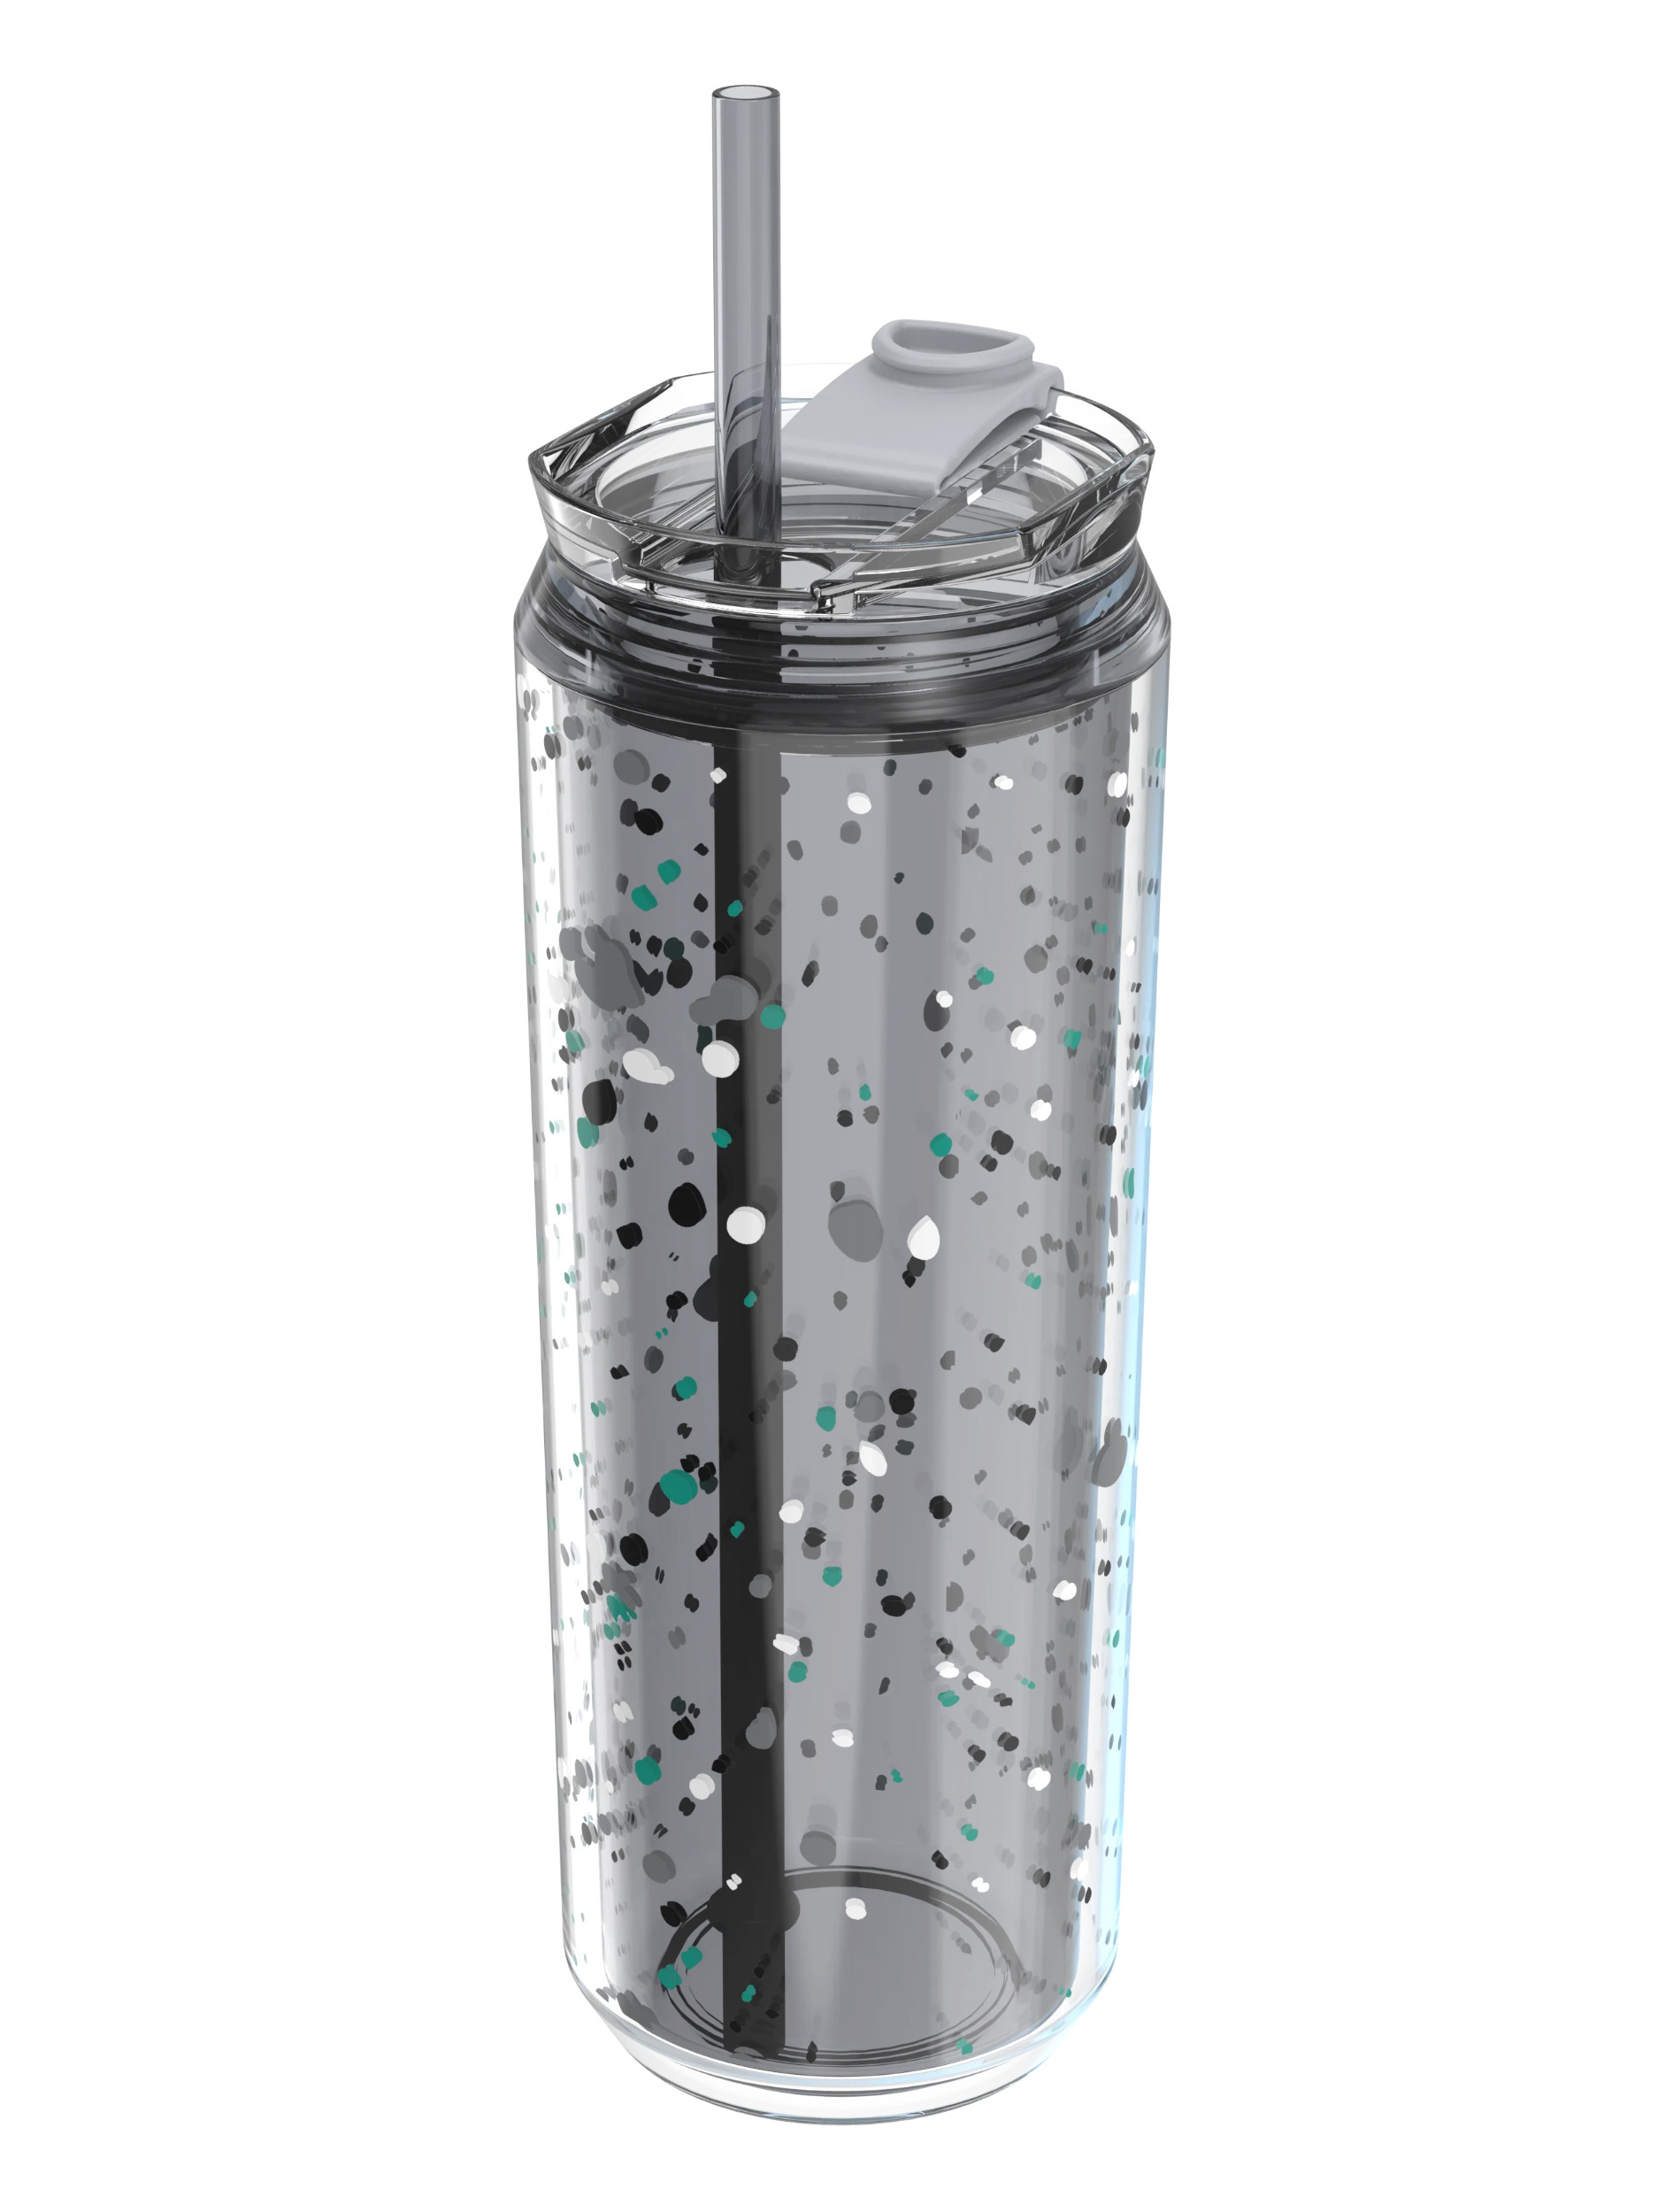 Cool Gear 3-Pack Modern Tumbler with Reusable Straw | Dishwasher Safe, Cup Holder Friendly, Spillproof, Double-Wall Insulated Travel Tumbler | Printed Splatter Pack - image 2 of 2